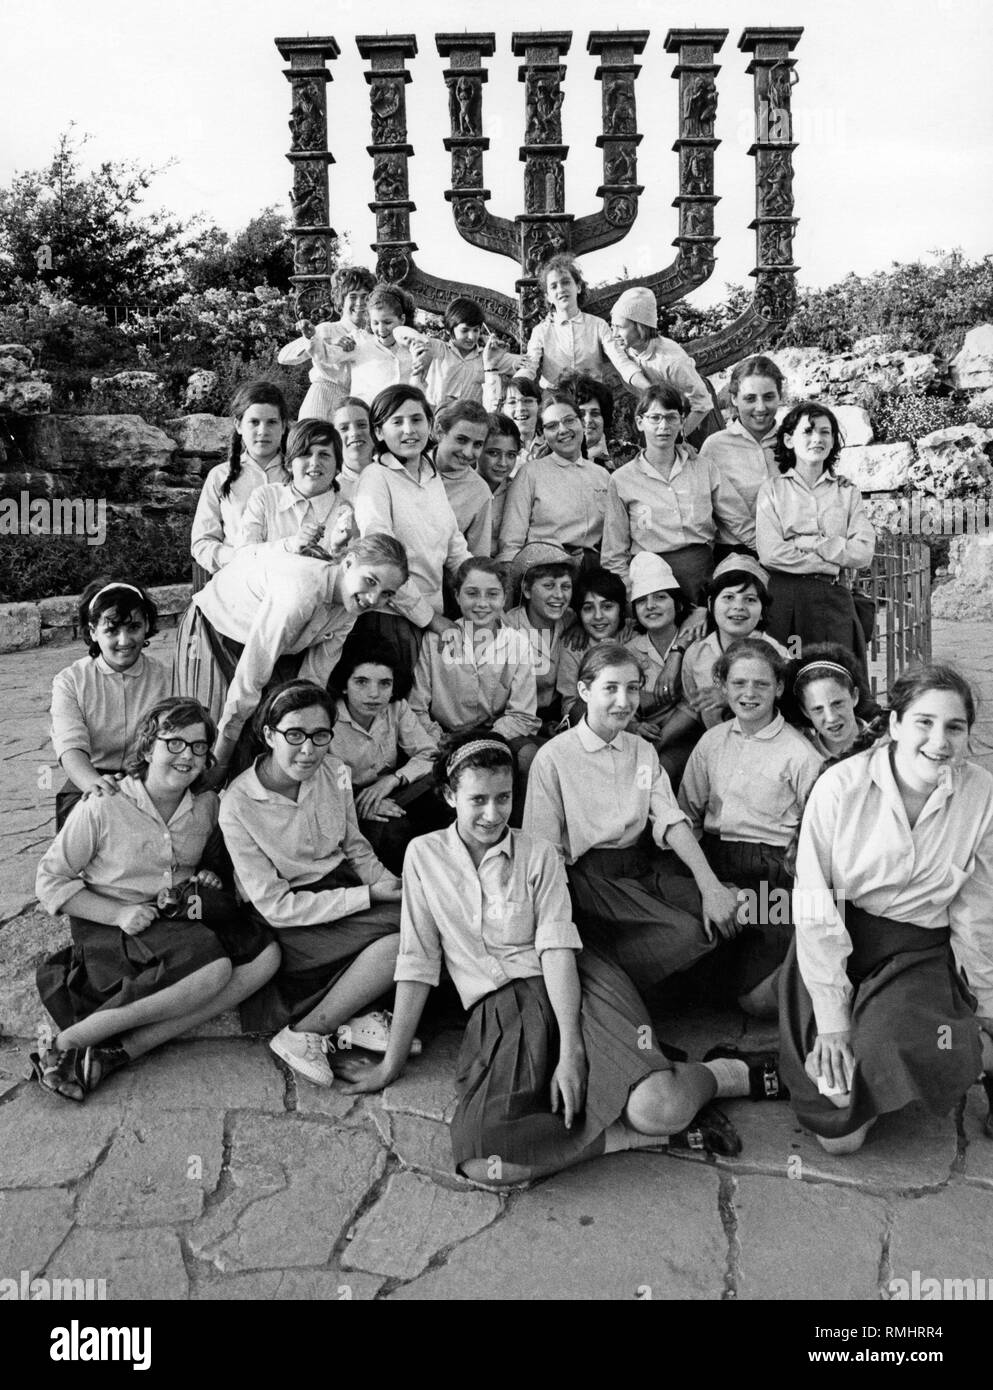 An Israeli school class at the Menorah by German sculptor Benno Elkan. The seven-branched candelabrum has stood in front of the Knesset, the Israeli parliament, in Jerusalem since 1966. Stock Photo